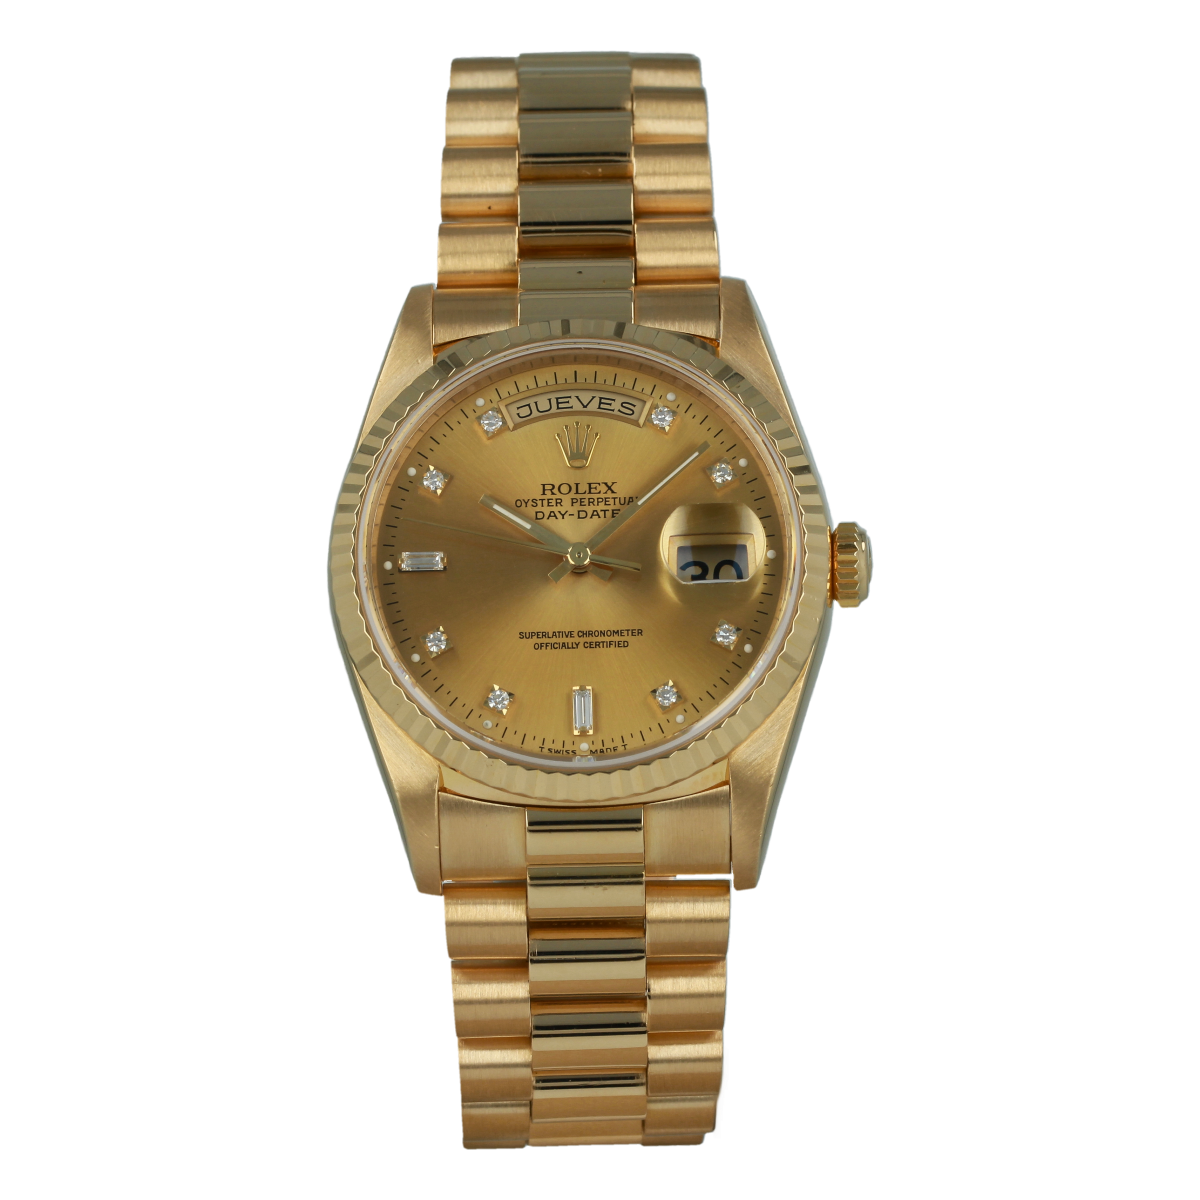 Rolex Day-Date 18238 36mm Yellow Gold Diamond-Set Champagne Dial (1994) | Buy pre-owned Rolex watch